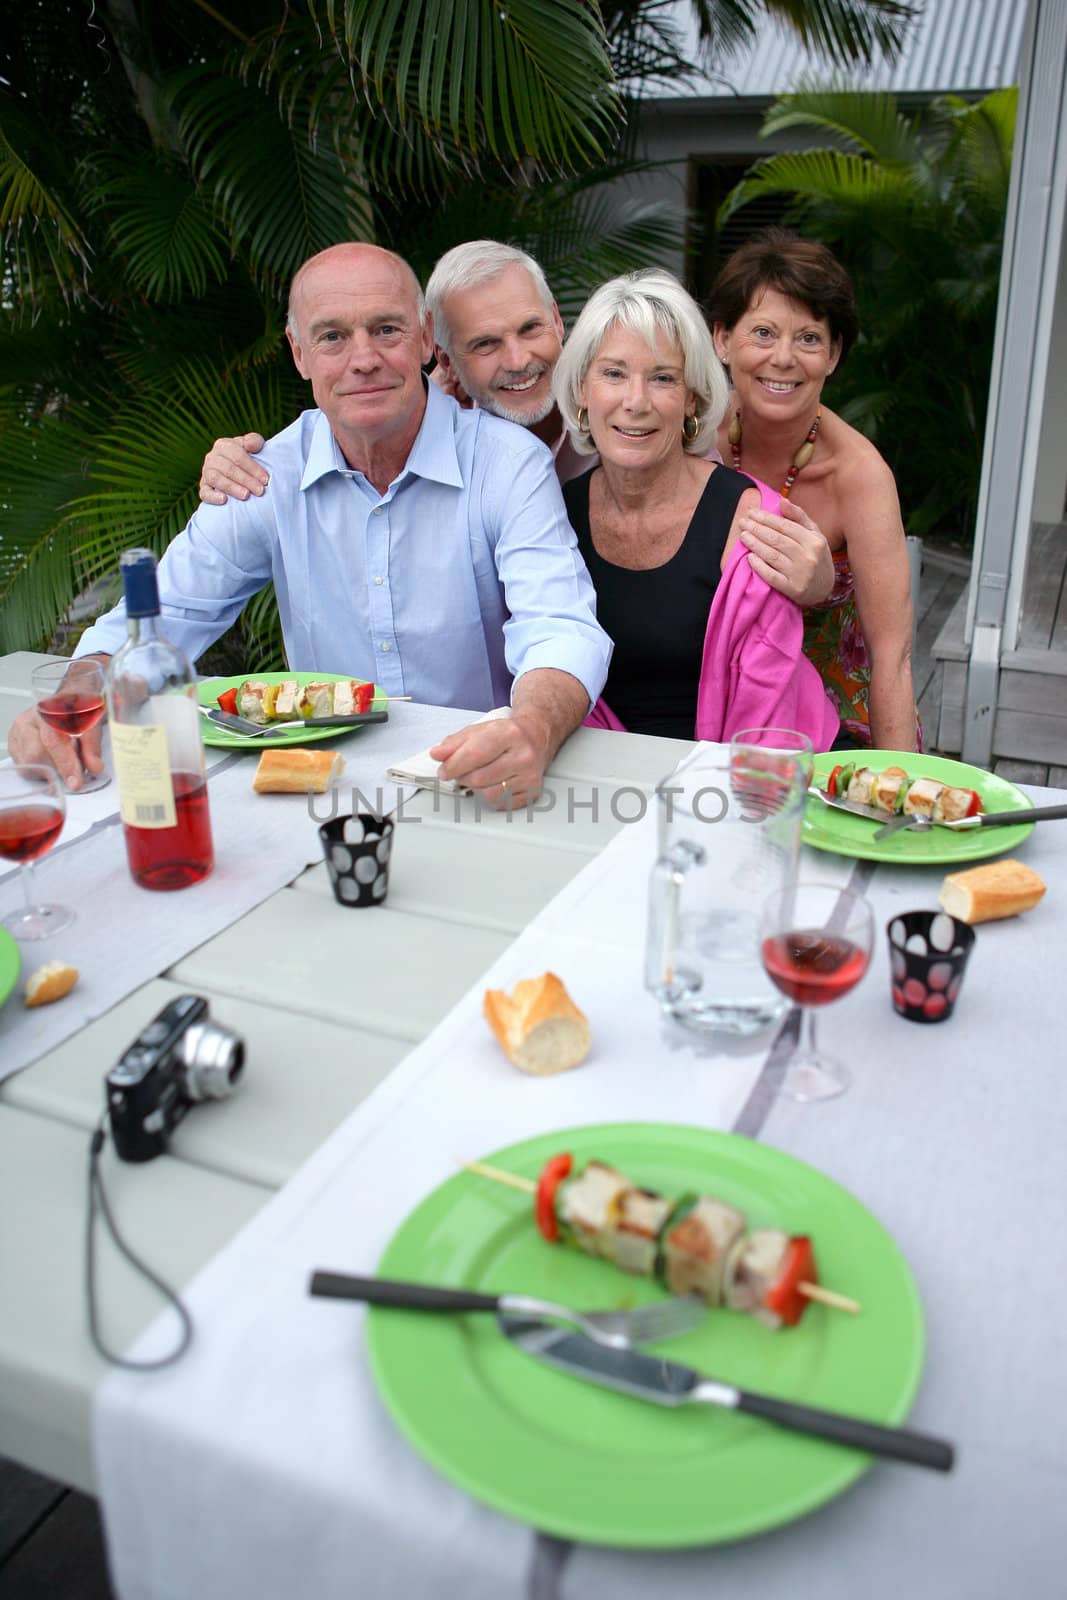 Friends posing for a photo during a barbecue